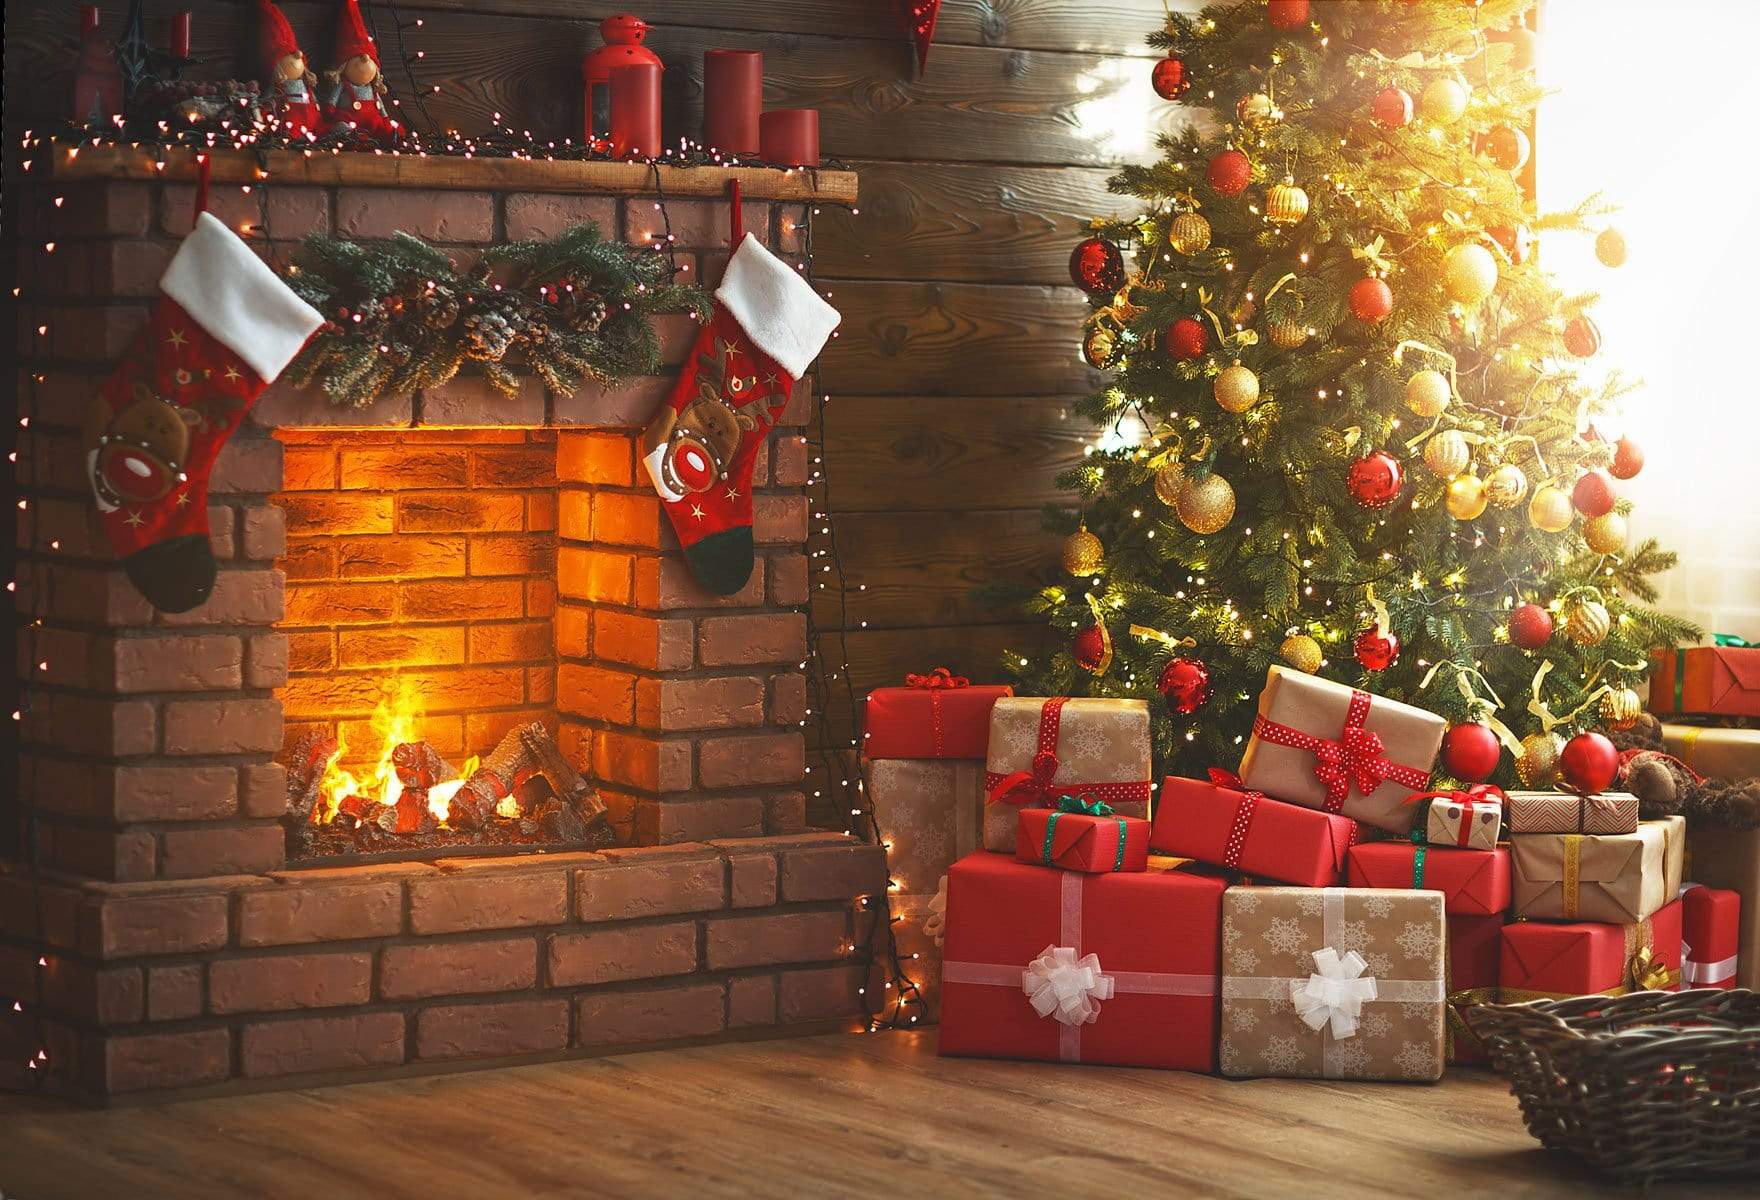 Katebackdrop£ºKate Winter Christmas trees  Fireplace  Stockings  Christmas Gifts for Pictures